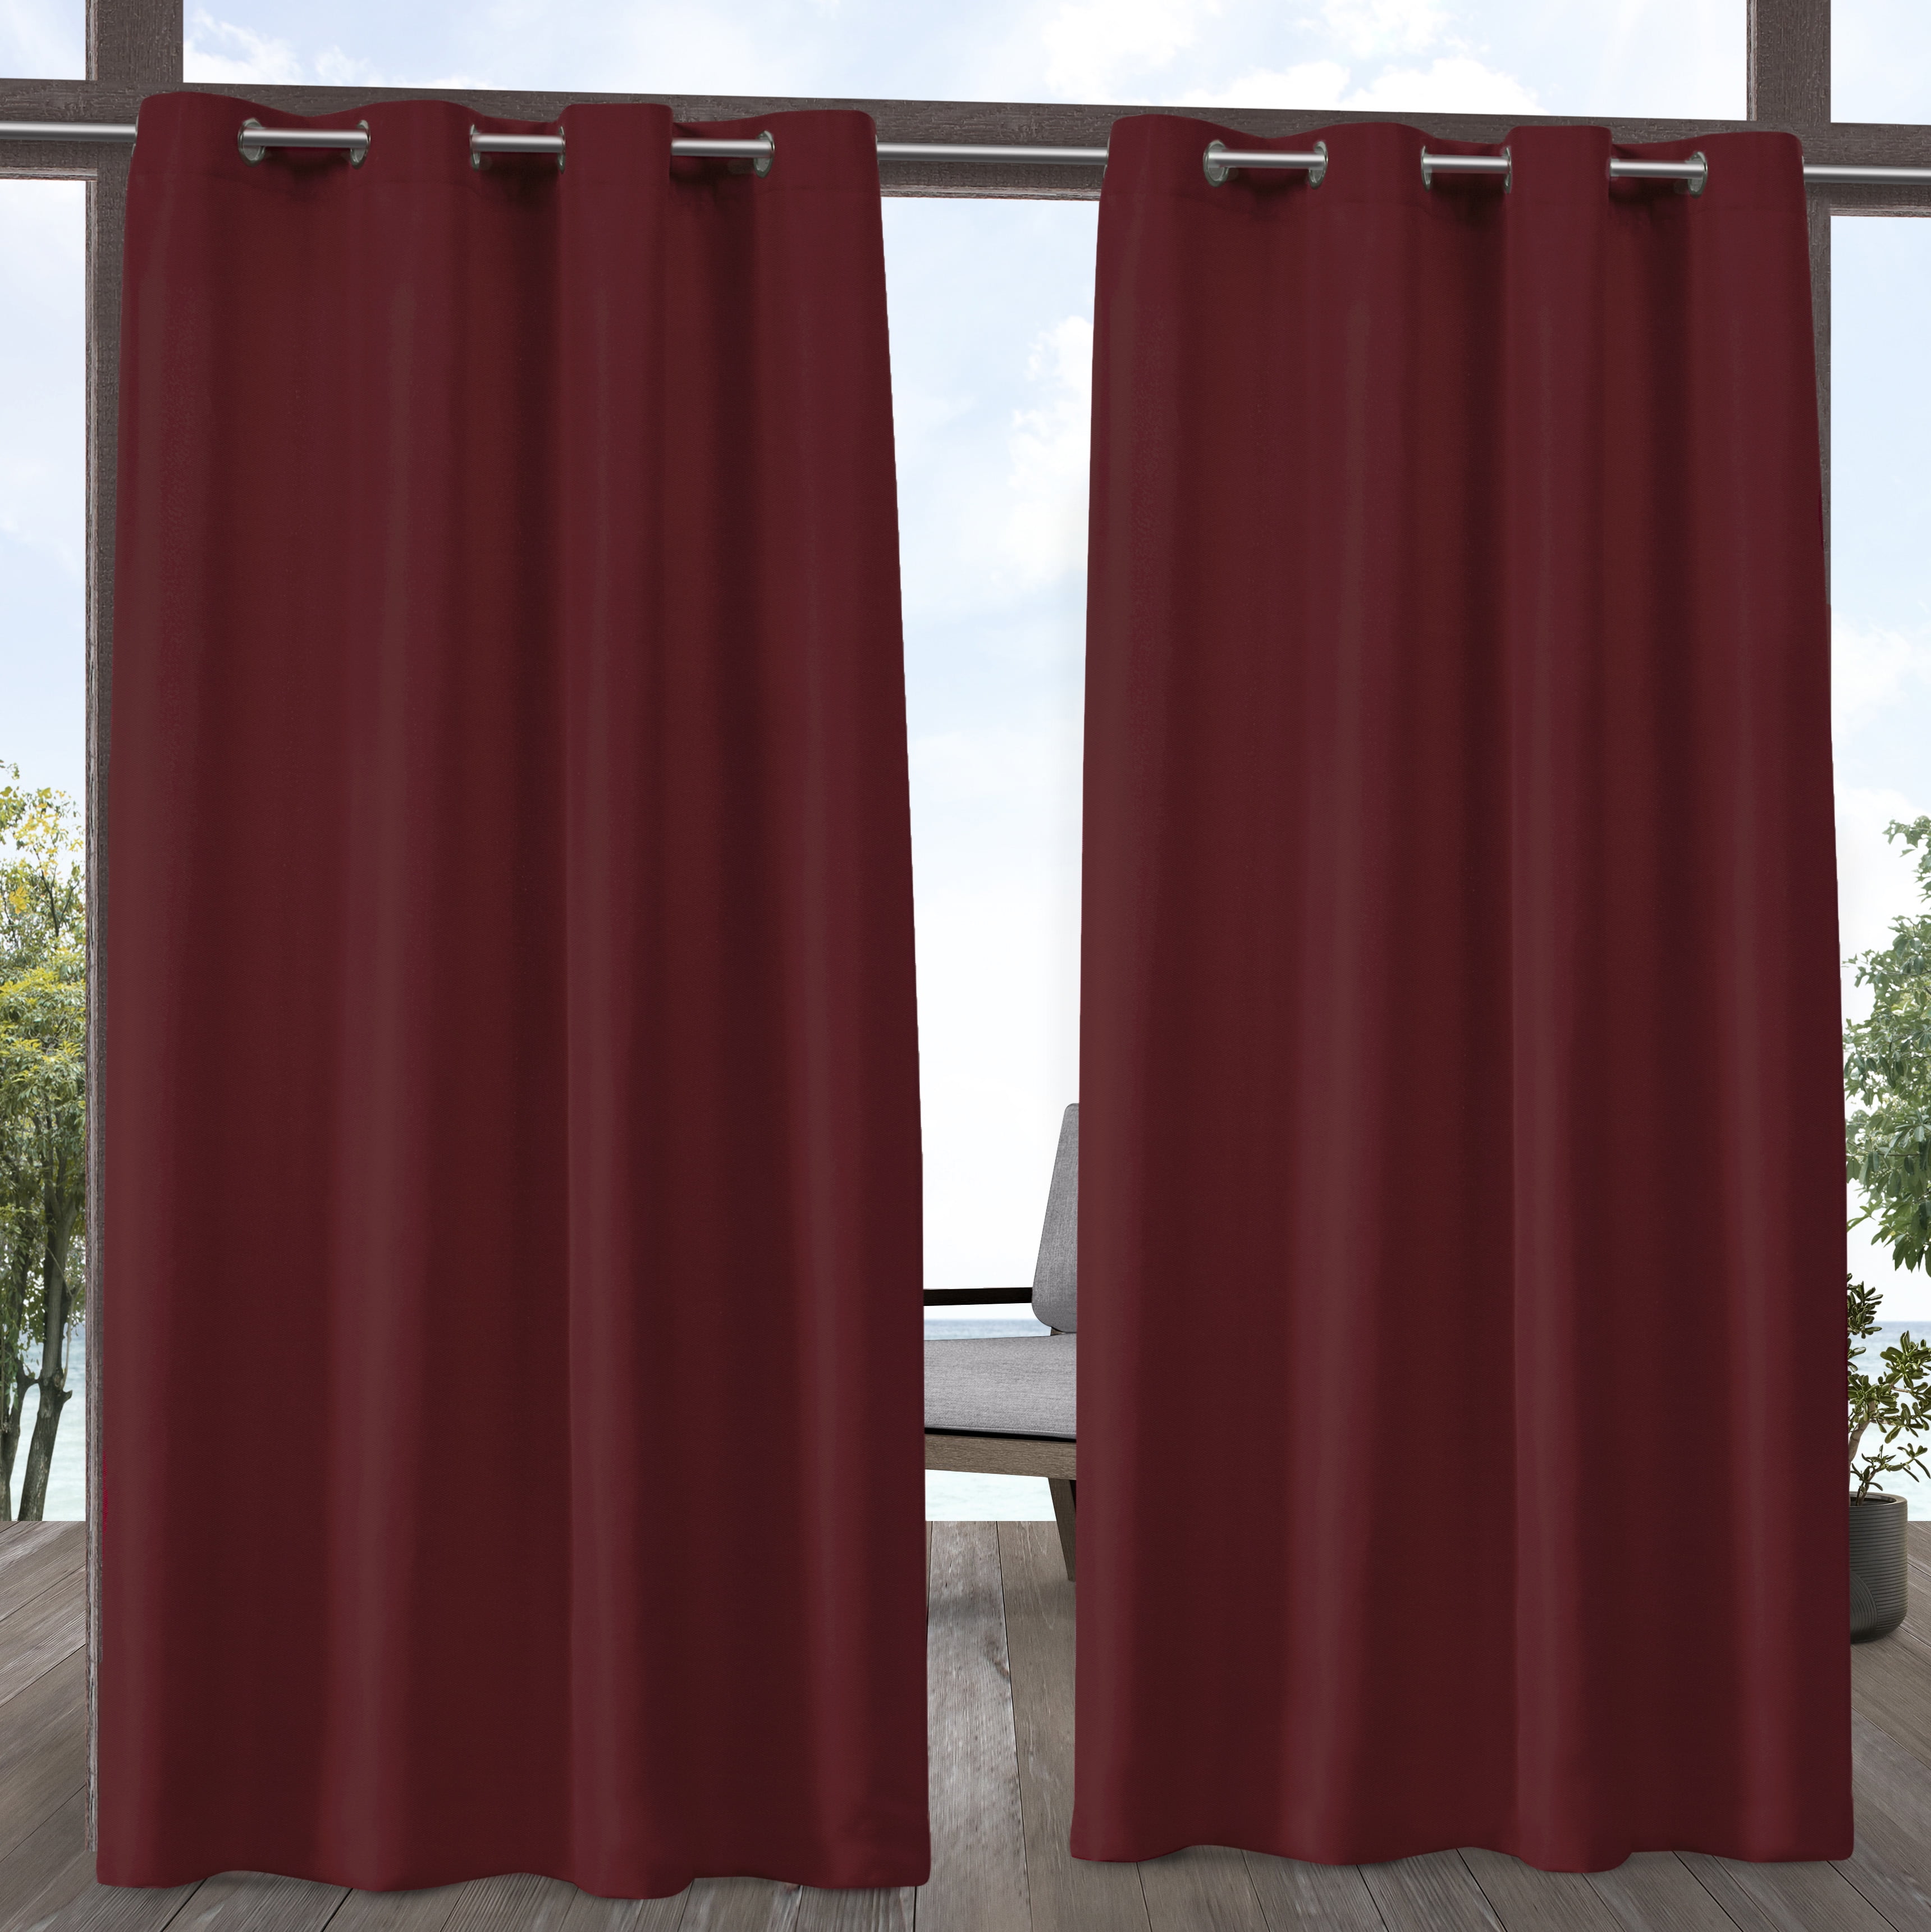 Teal 2 Count Exclusive Home Curtains Indoor/Outdoor Solid Cabana Grommet Top Curtain Panel Pair 54x108 